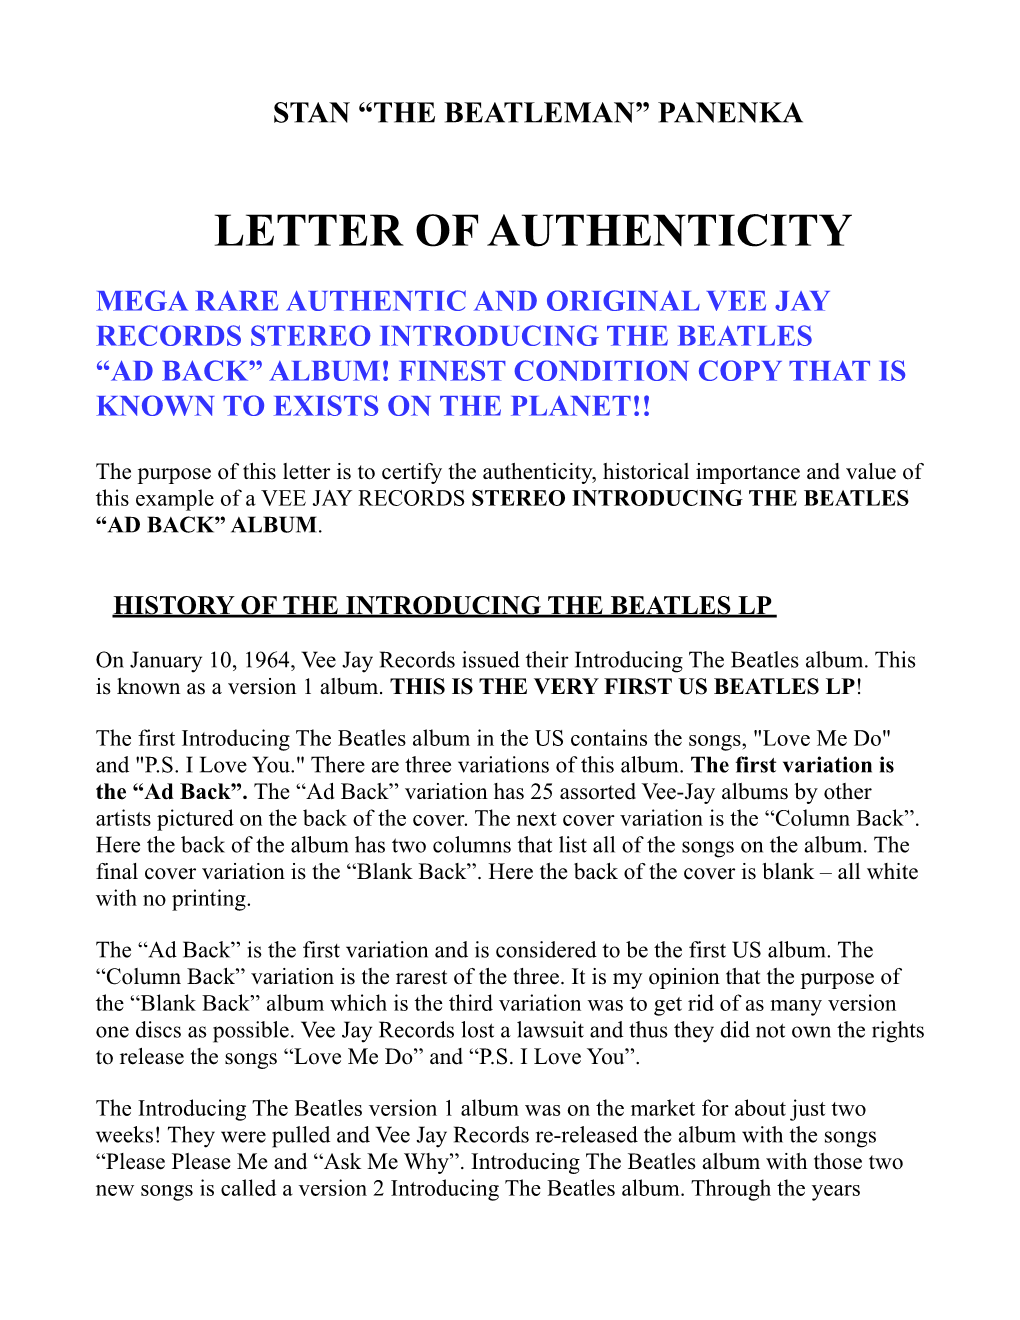 Authenticity Letter for Stereo Introducing The